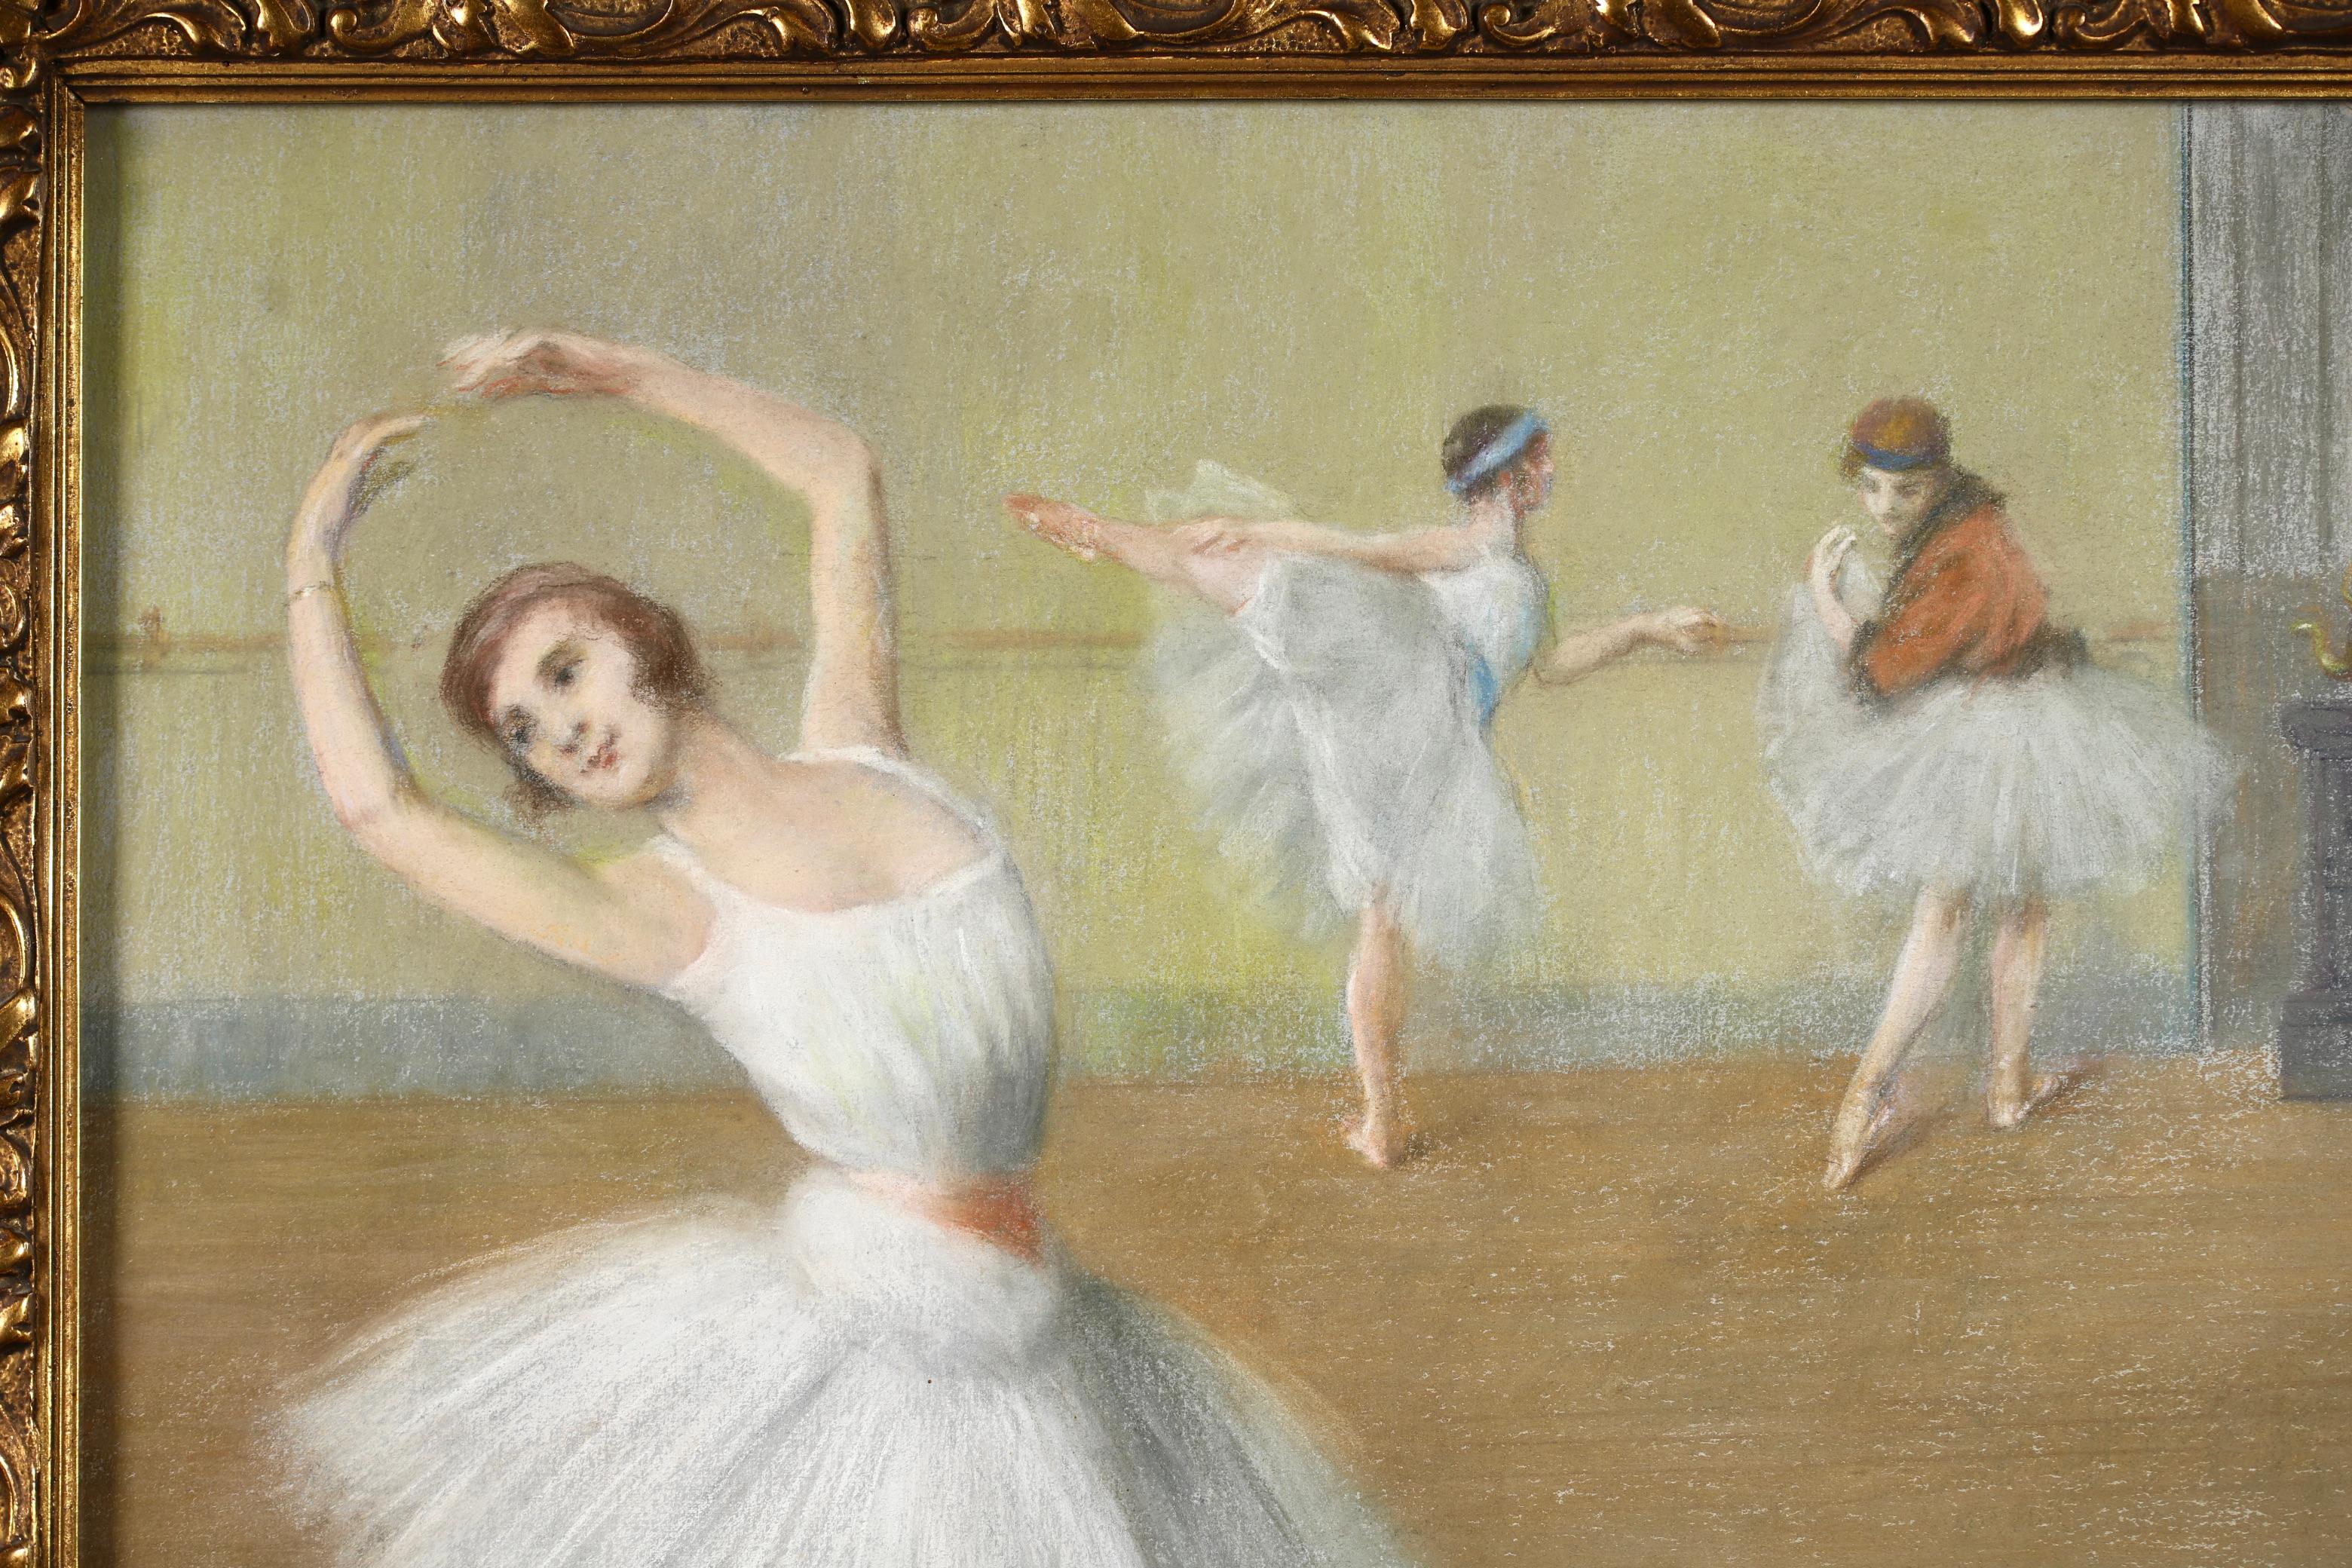 Signed figurative pastel on canvas circa 1910 by French genre painter Pierre Carrier-Belleuse. The work depicts three ballerinas wearing white tutus, warming up in a studio. Carrier-Belleuse was a contemporary of Edgar Degas and they exhibited